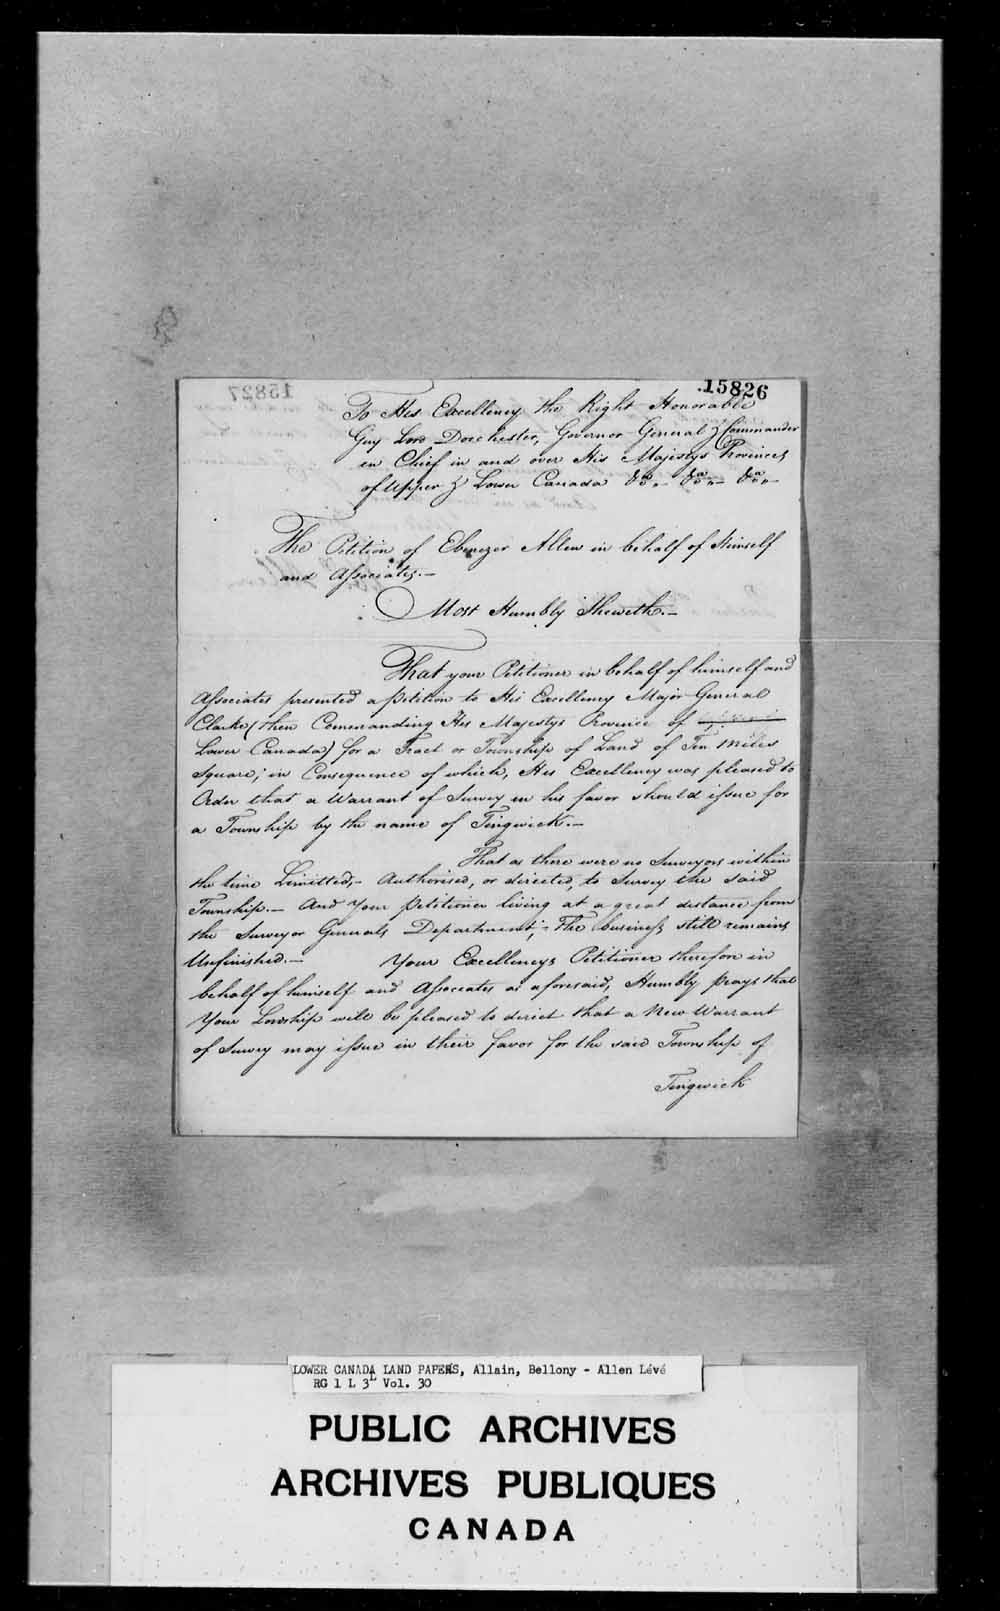 Digitized page of  for Image No.: e003702656